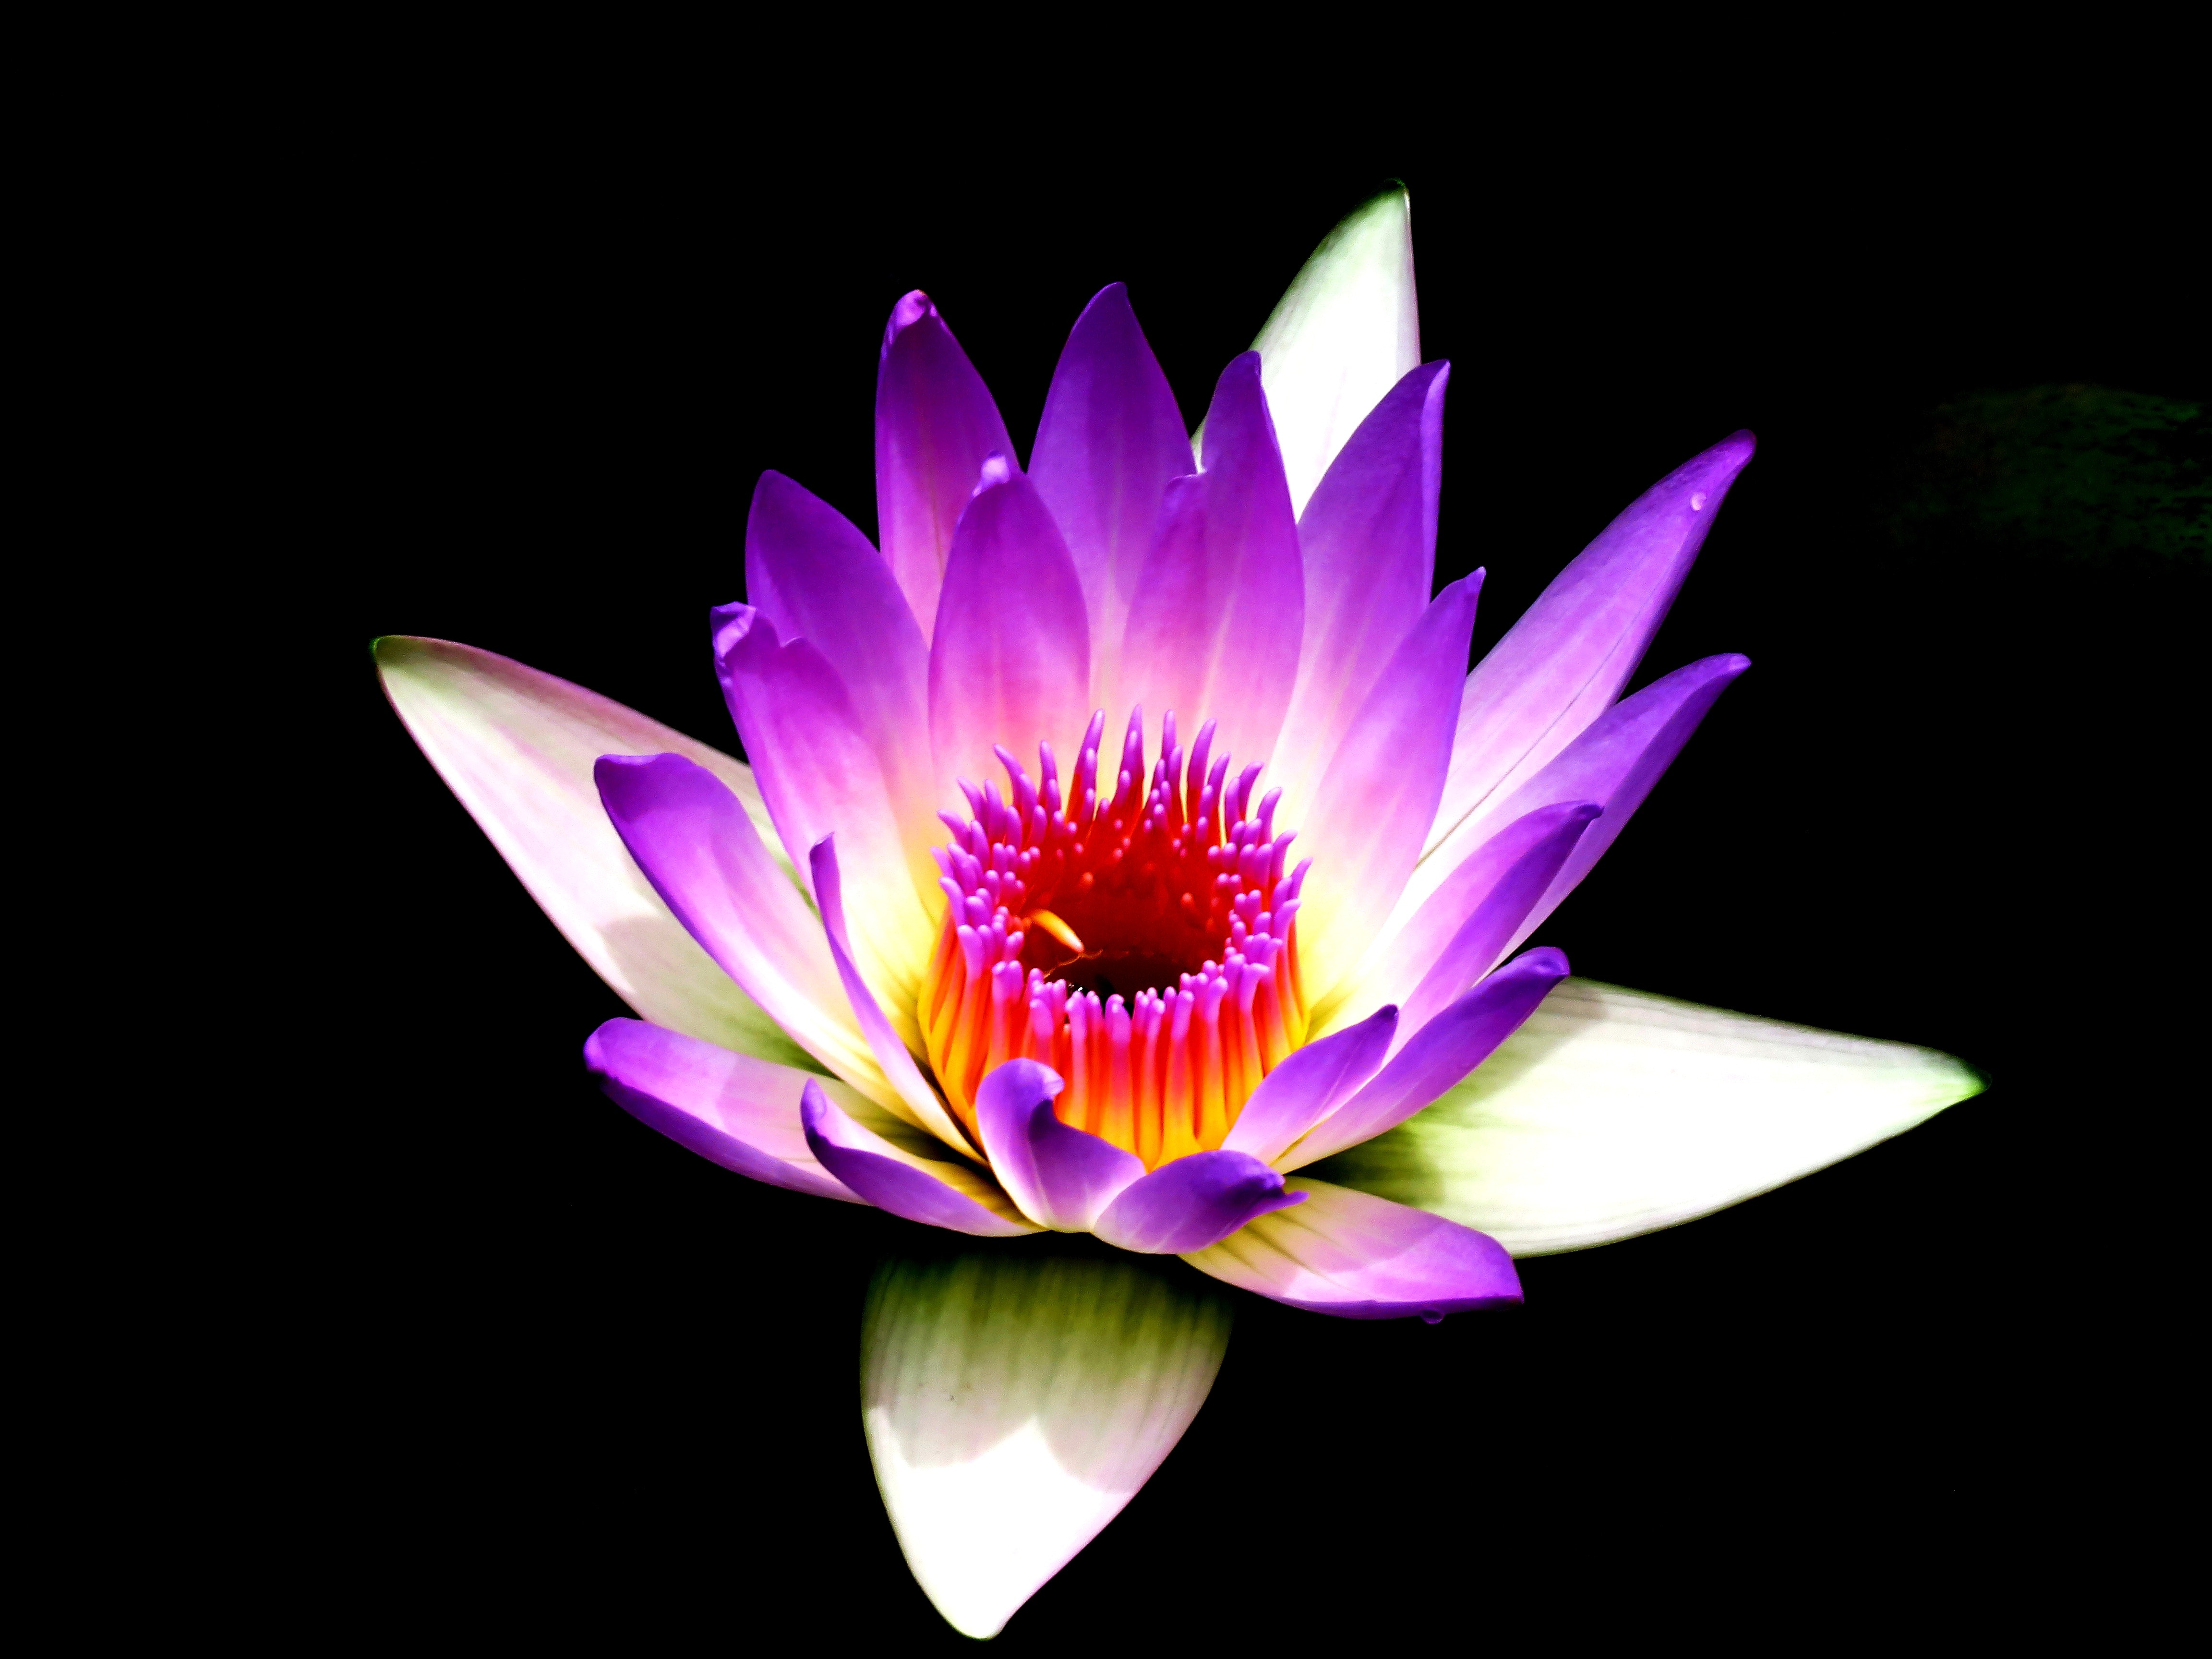 A beautifully colored flower in front of a black background.